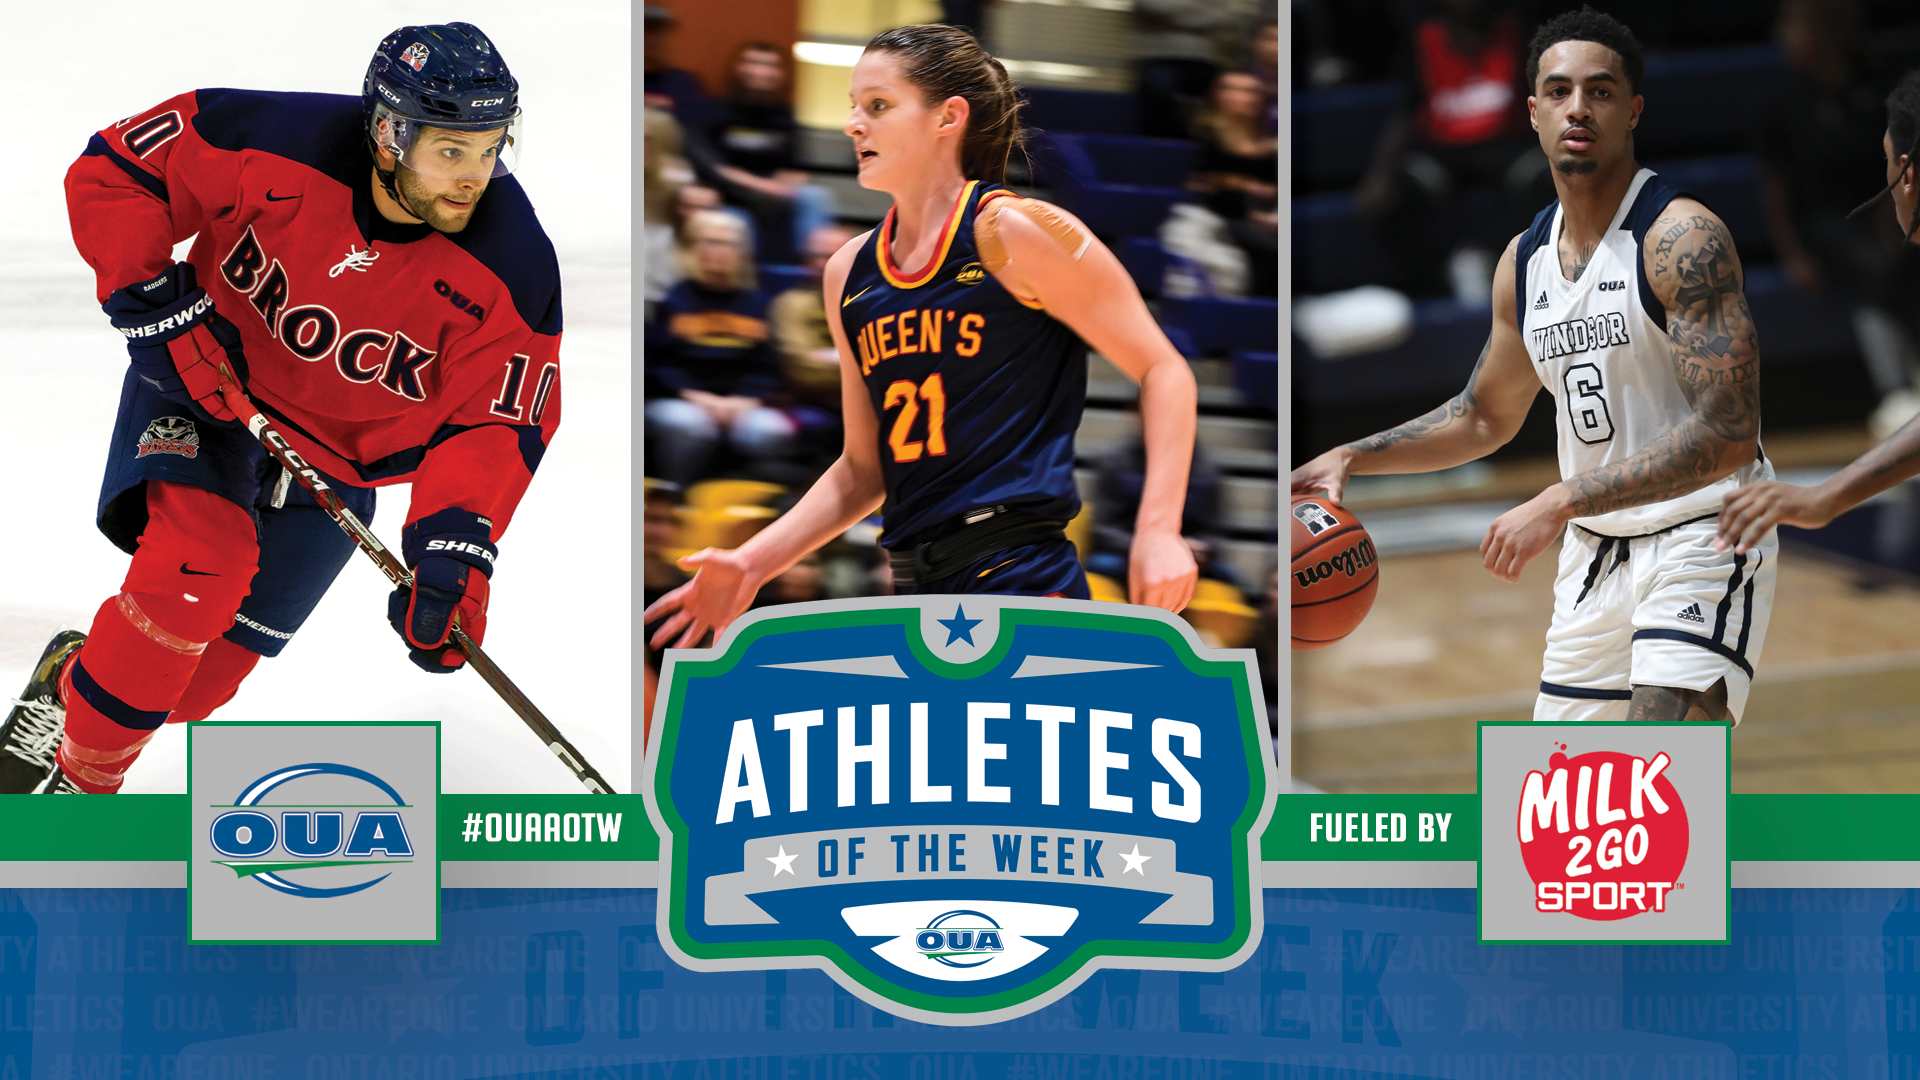 Berg, Chadwick, Brown-Henderson named OUA athletes of the week